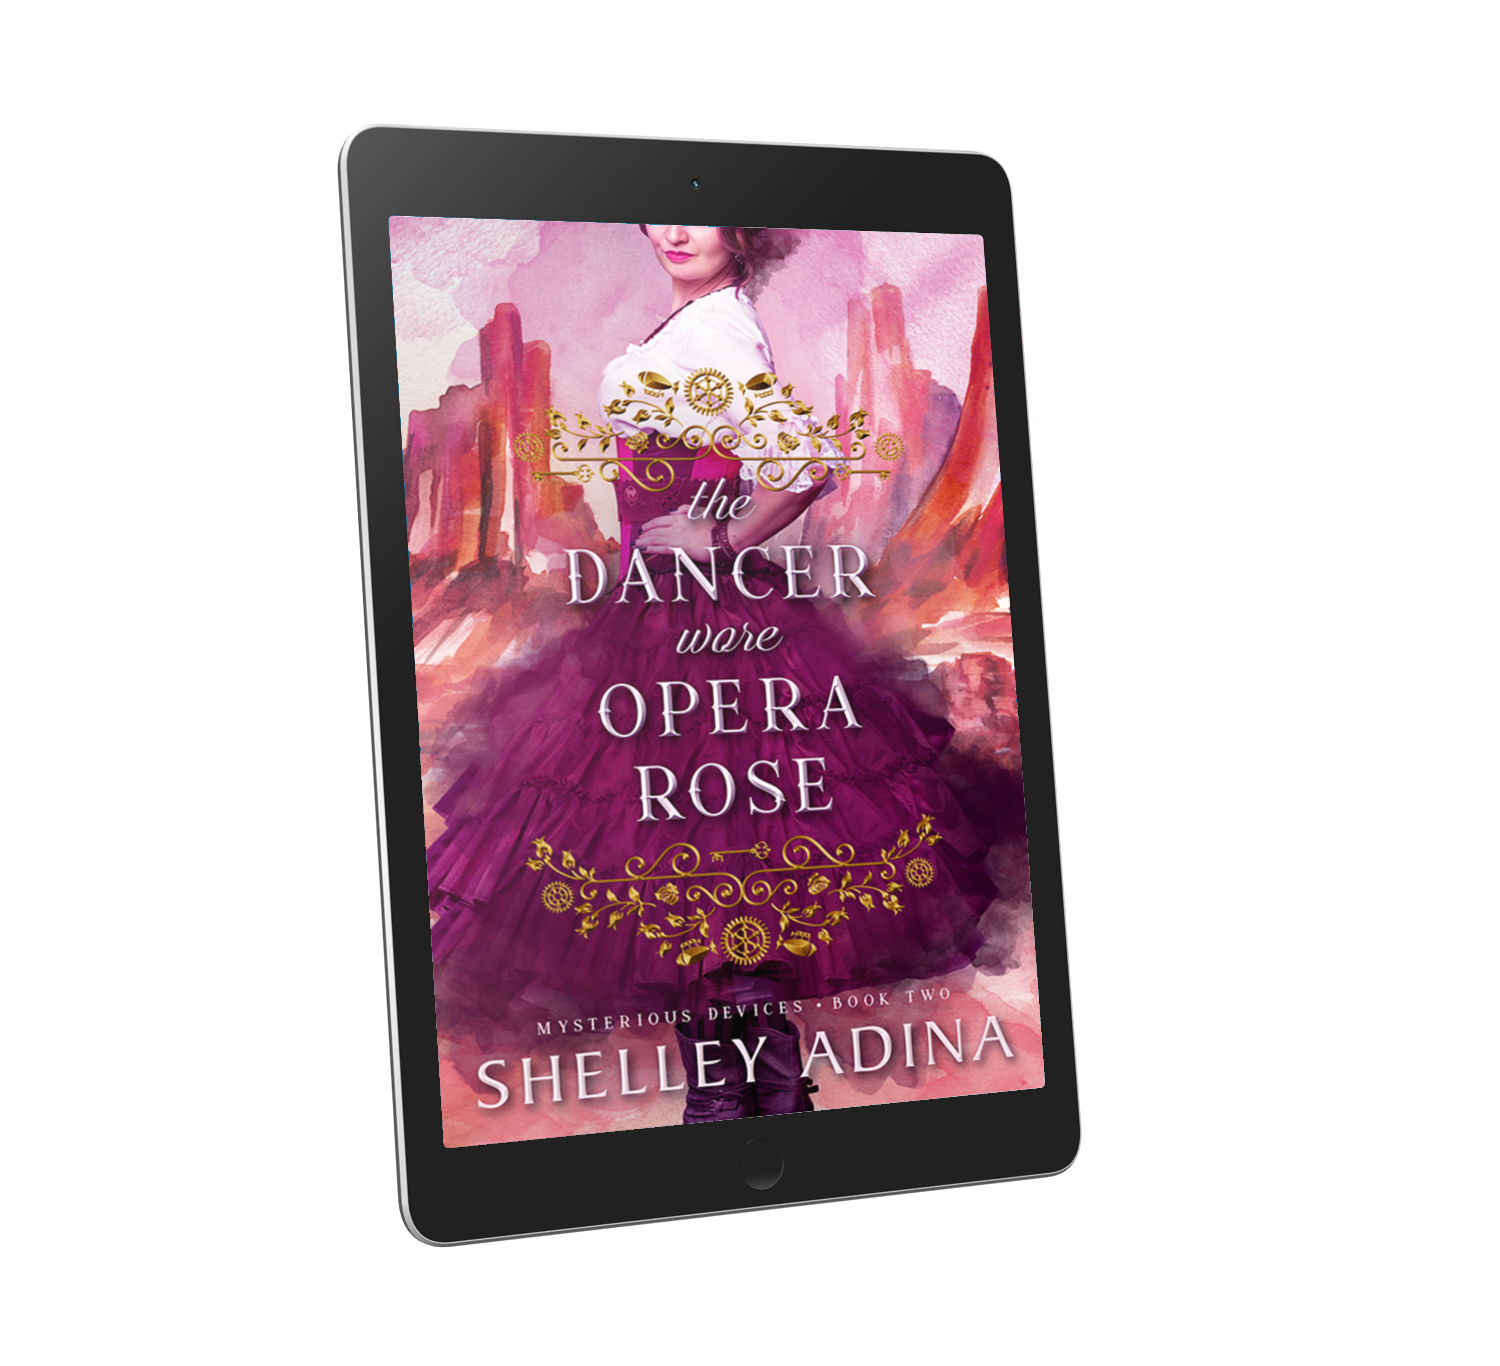 The Dancer Wore Opera Rose by Shelley Adina, a steampunk adventure mystery